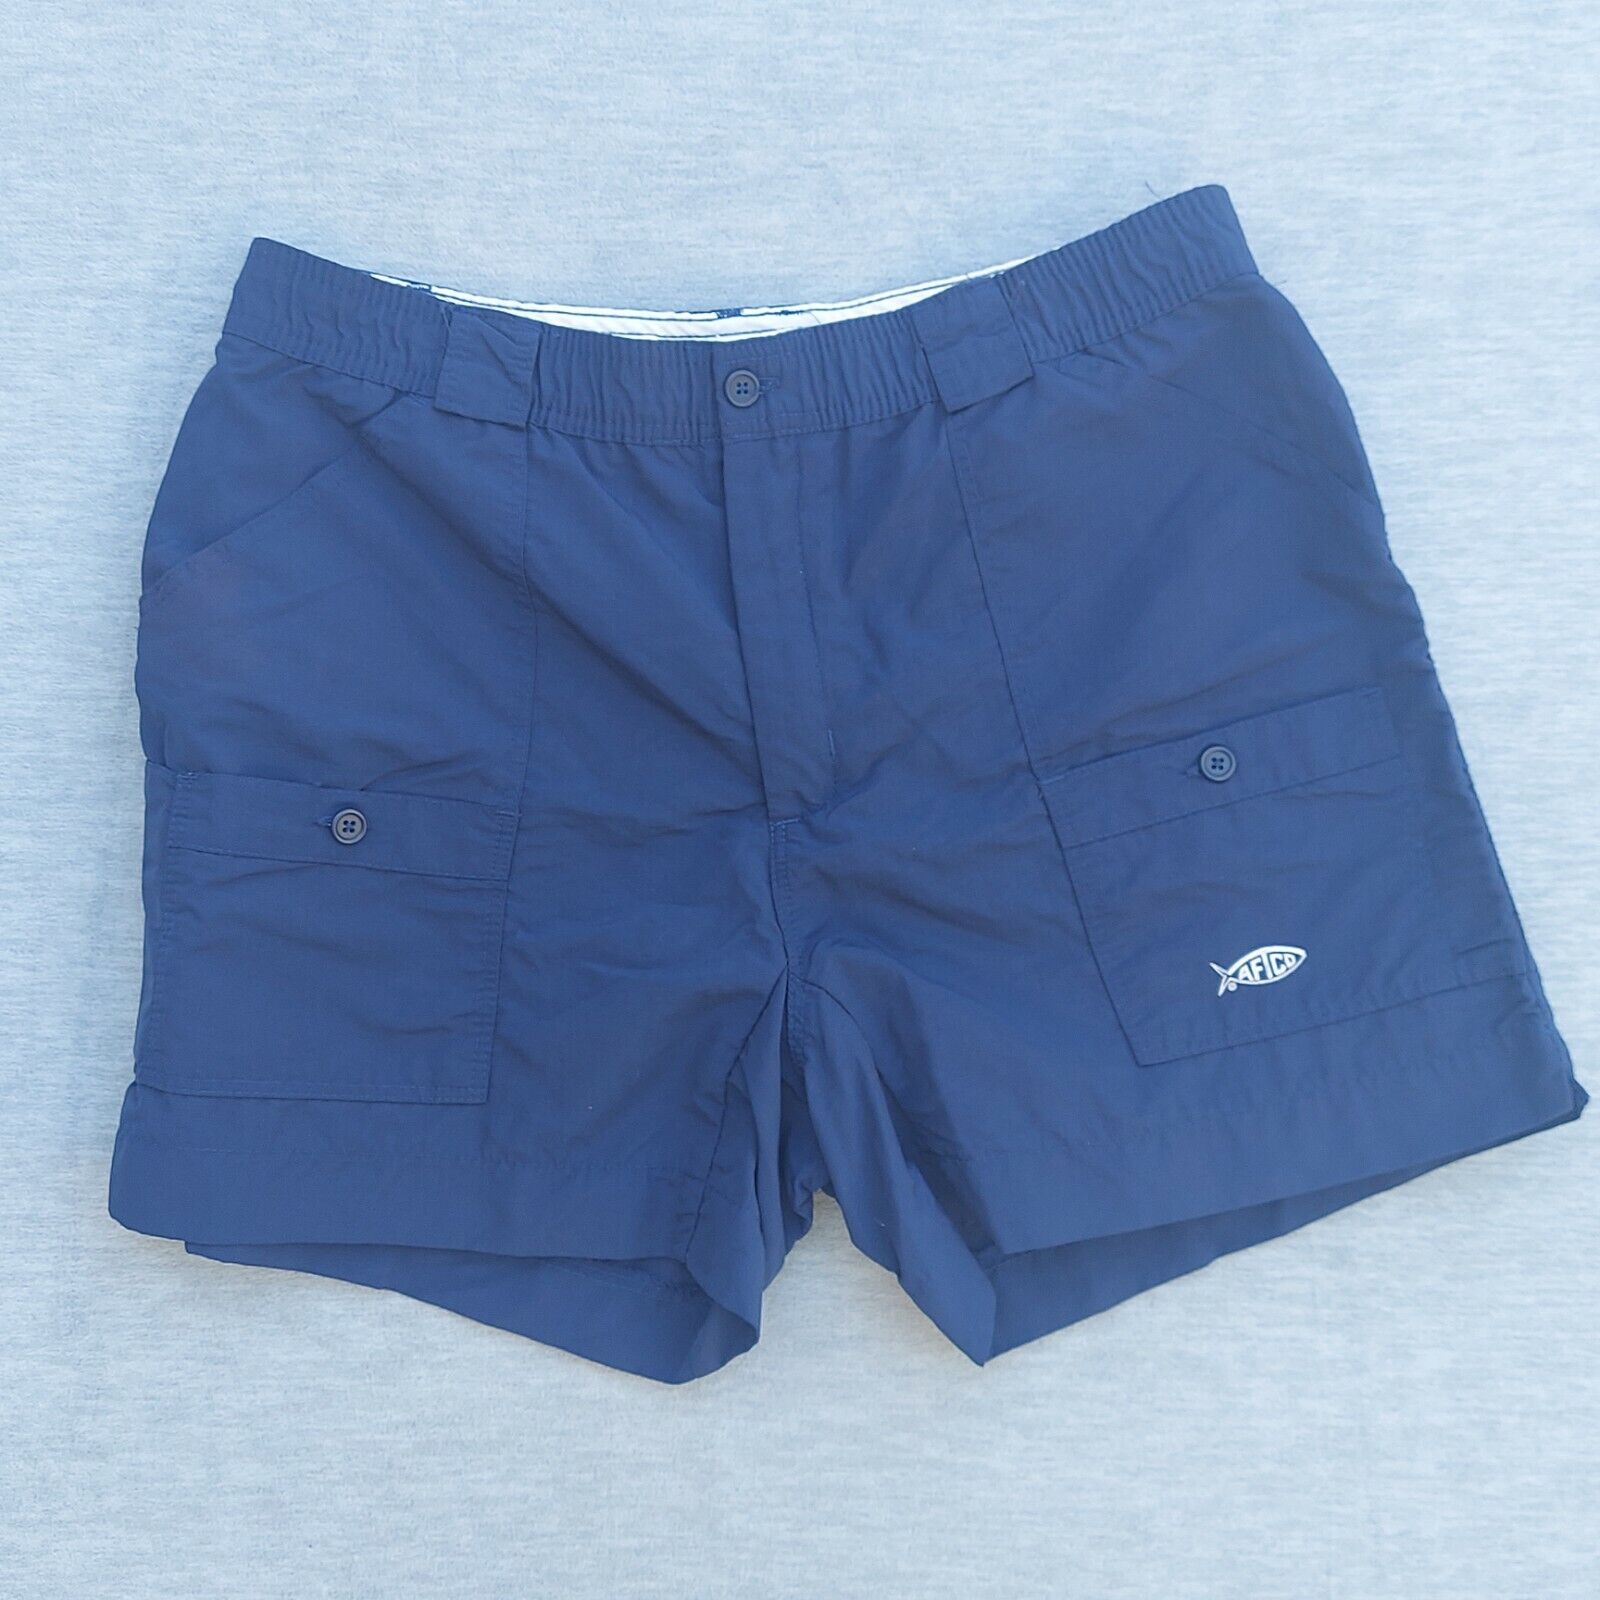 AFTCO Vintage Bluewater Wear Royal Fishing free 67% OFF of fixed price shipping Cargo Nylon Blue Shor